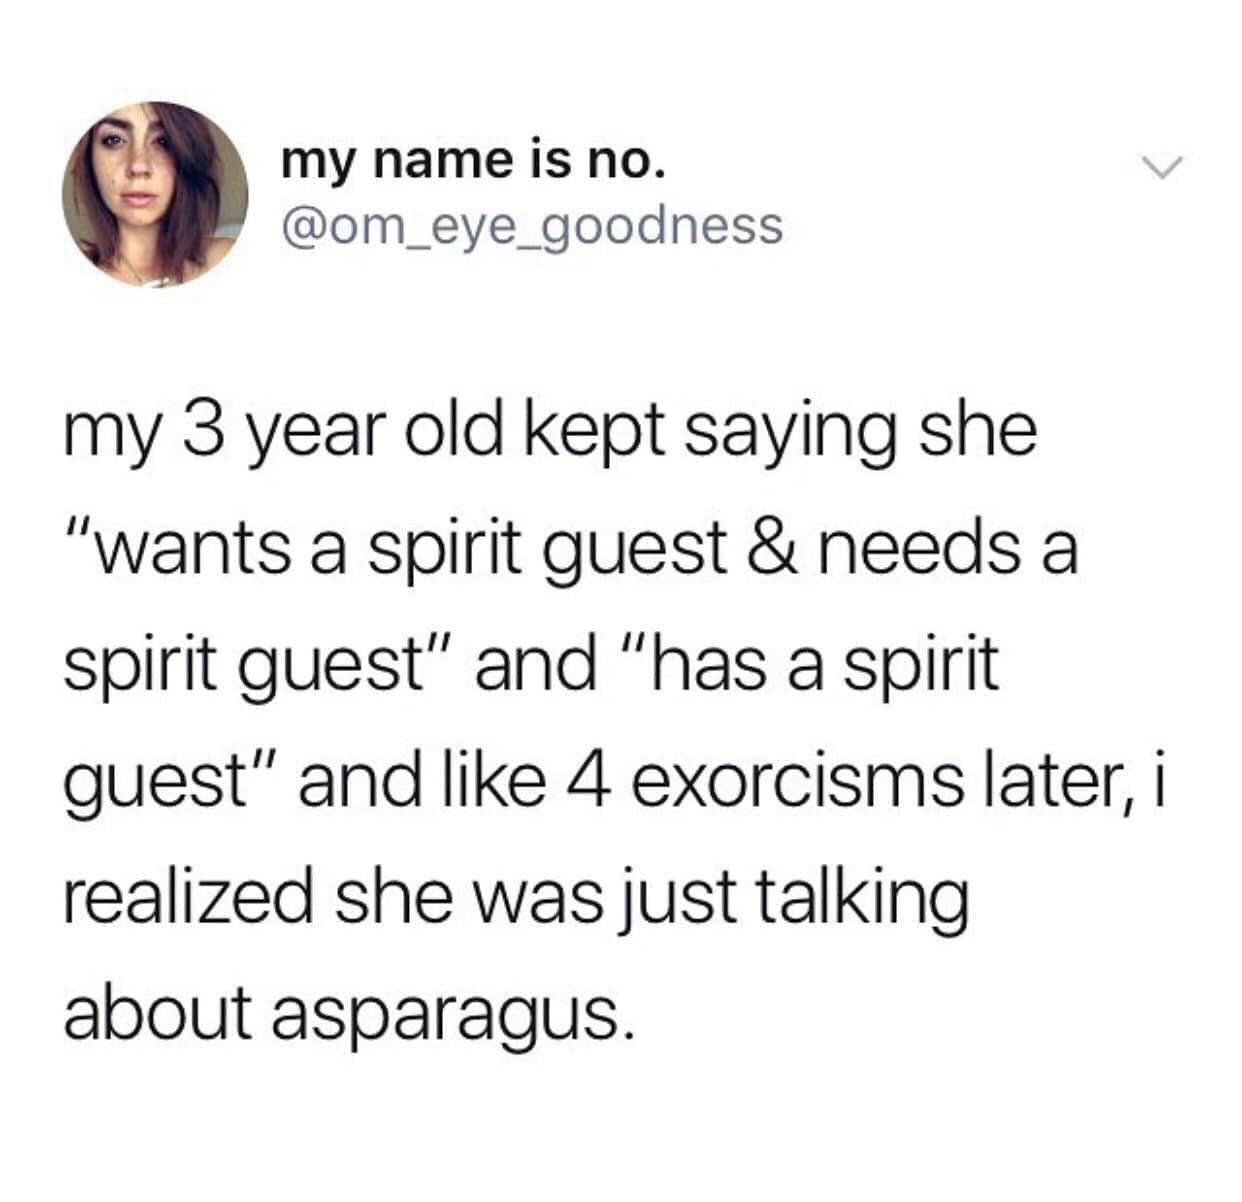 margarita susan meme - my name is no. my 3 year old kept saying she "wants a spirit guest & needs a spirit guest" and "has a spirit guest" and 4 exorcisms later, i realized she was just talking about asparagus.